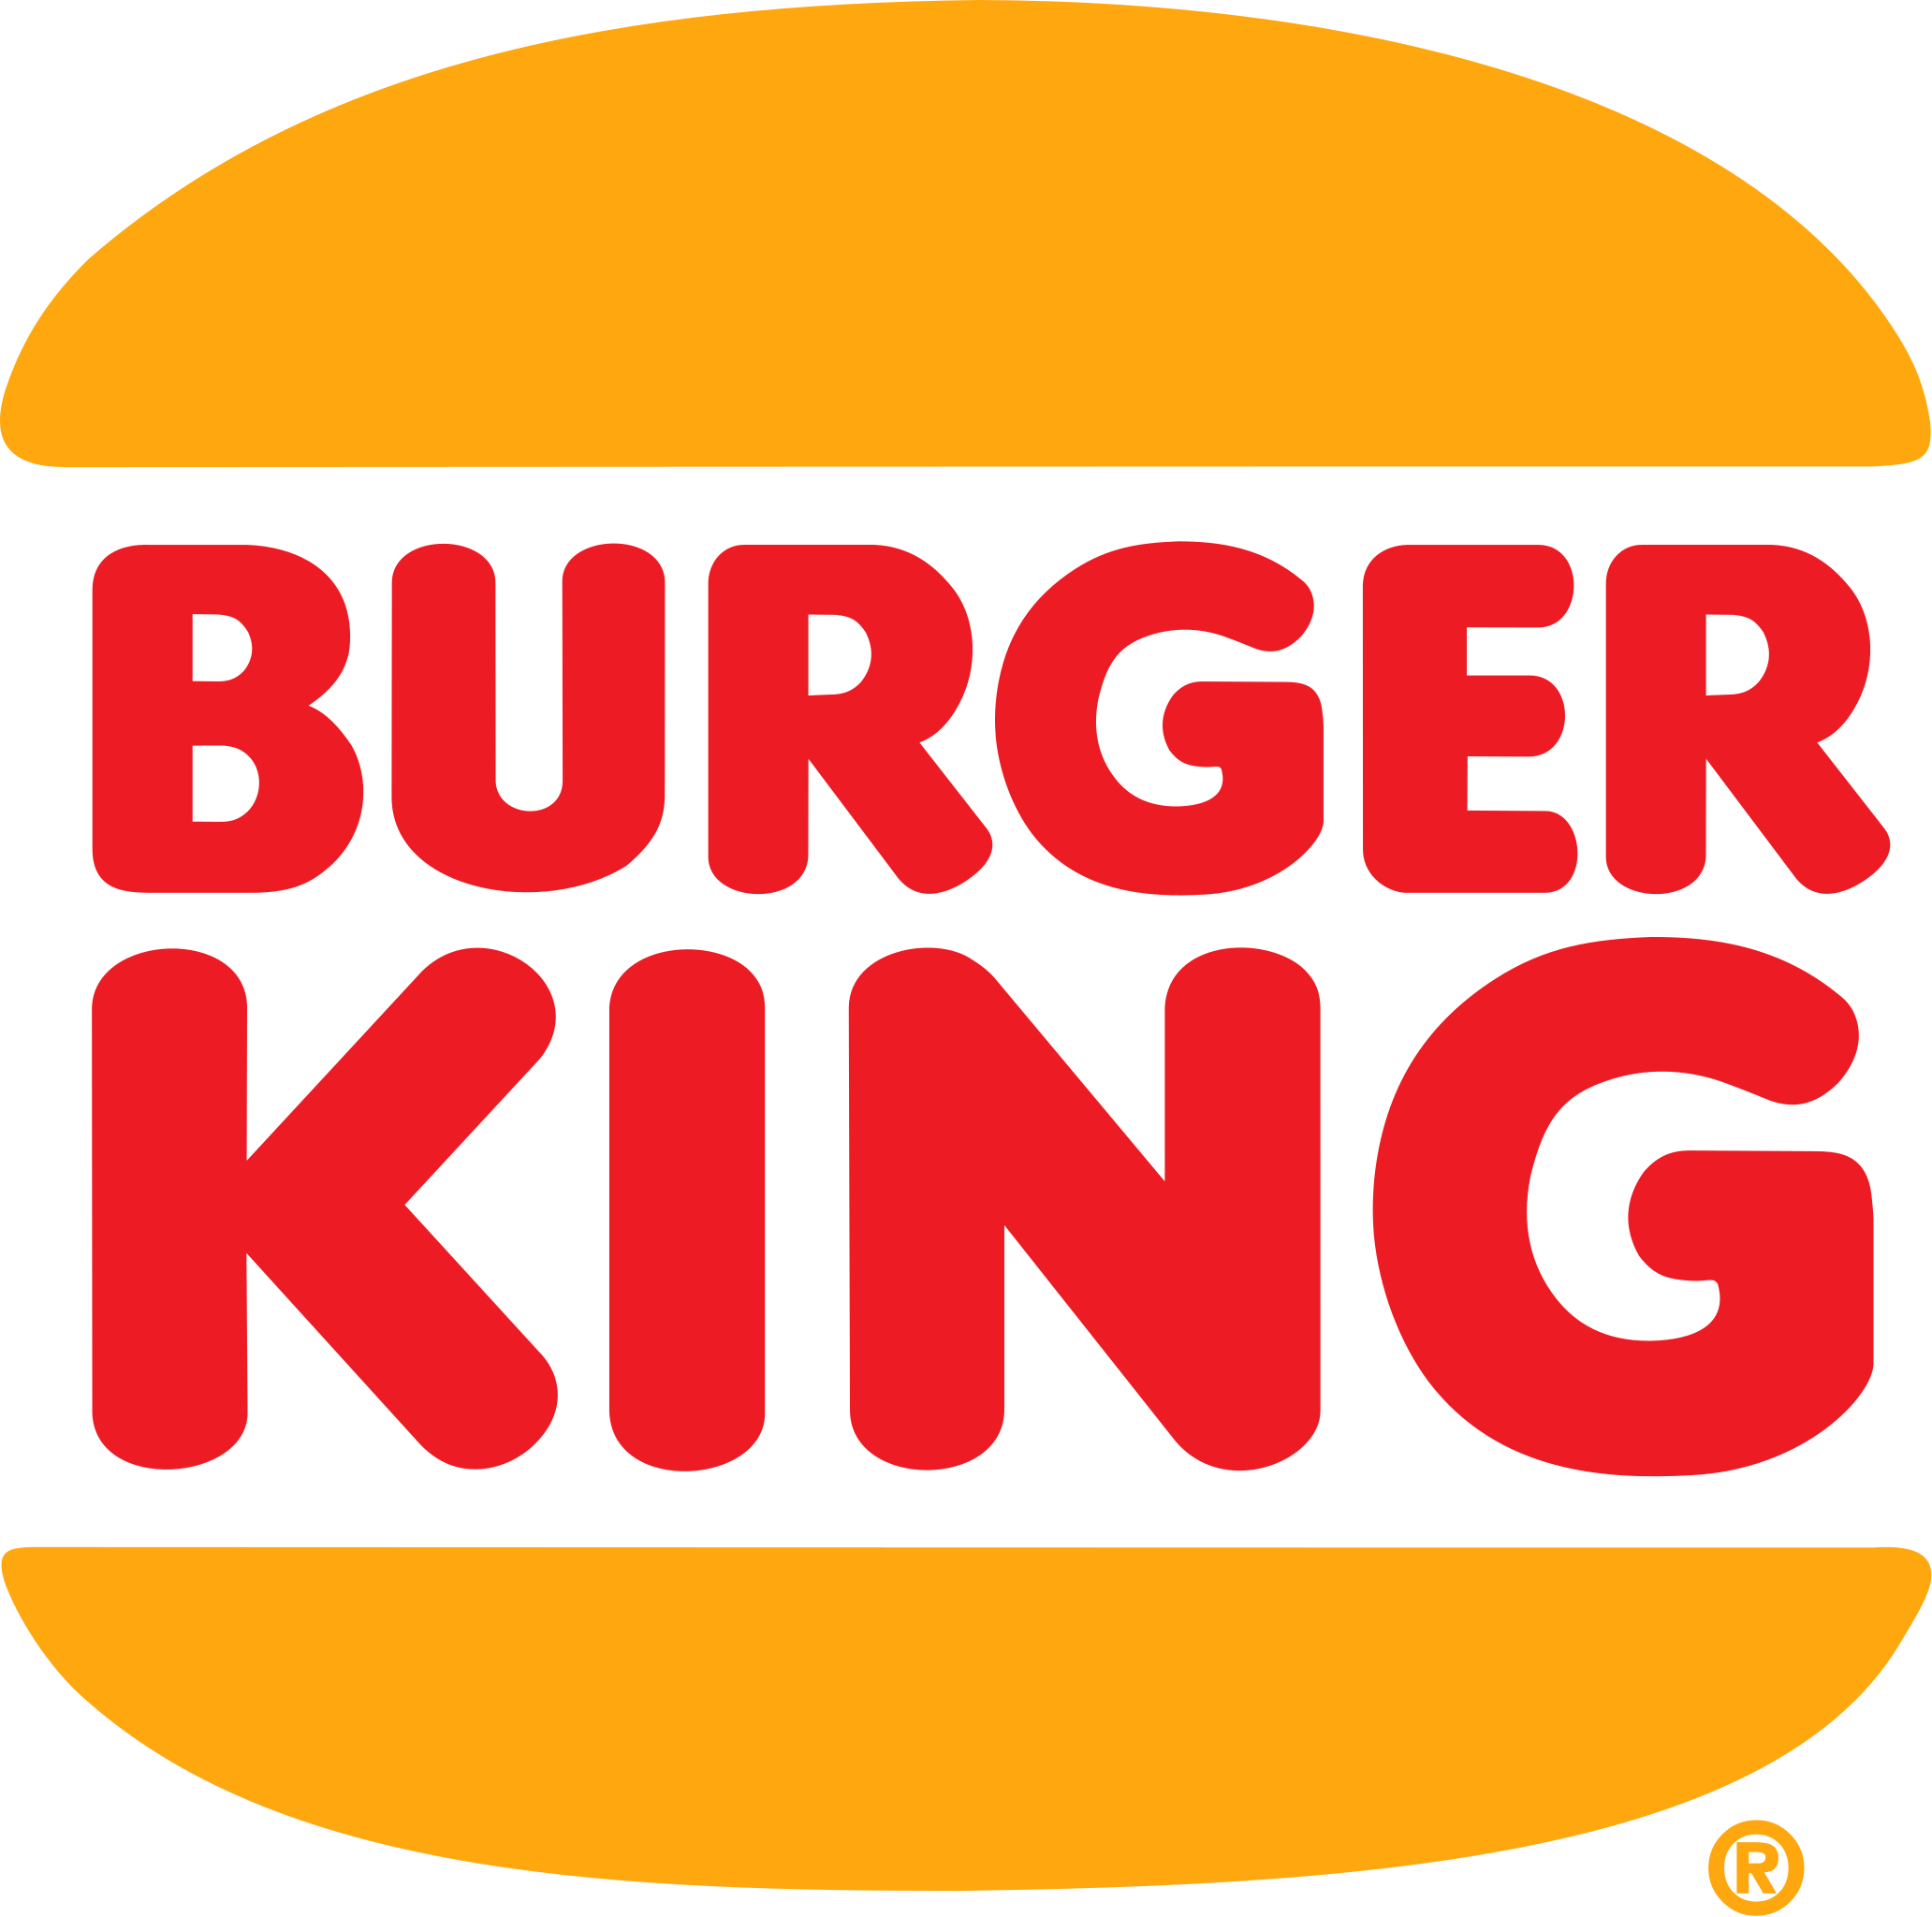 https://static.wikia.nocookie.net/future-ideas/images/1/12/Burger_King_1994_logo.svg.png/revision/latest?cb=20220809044228